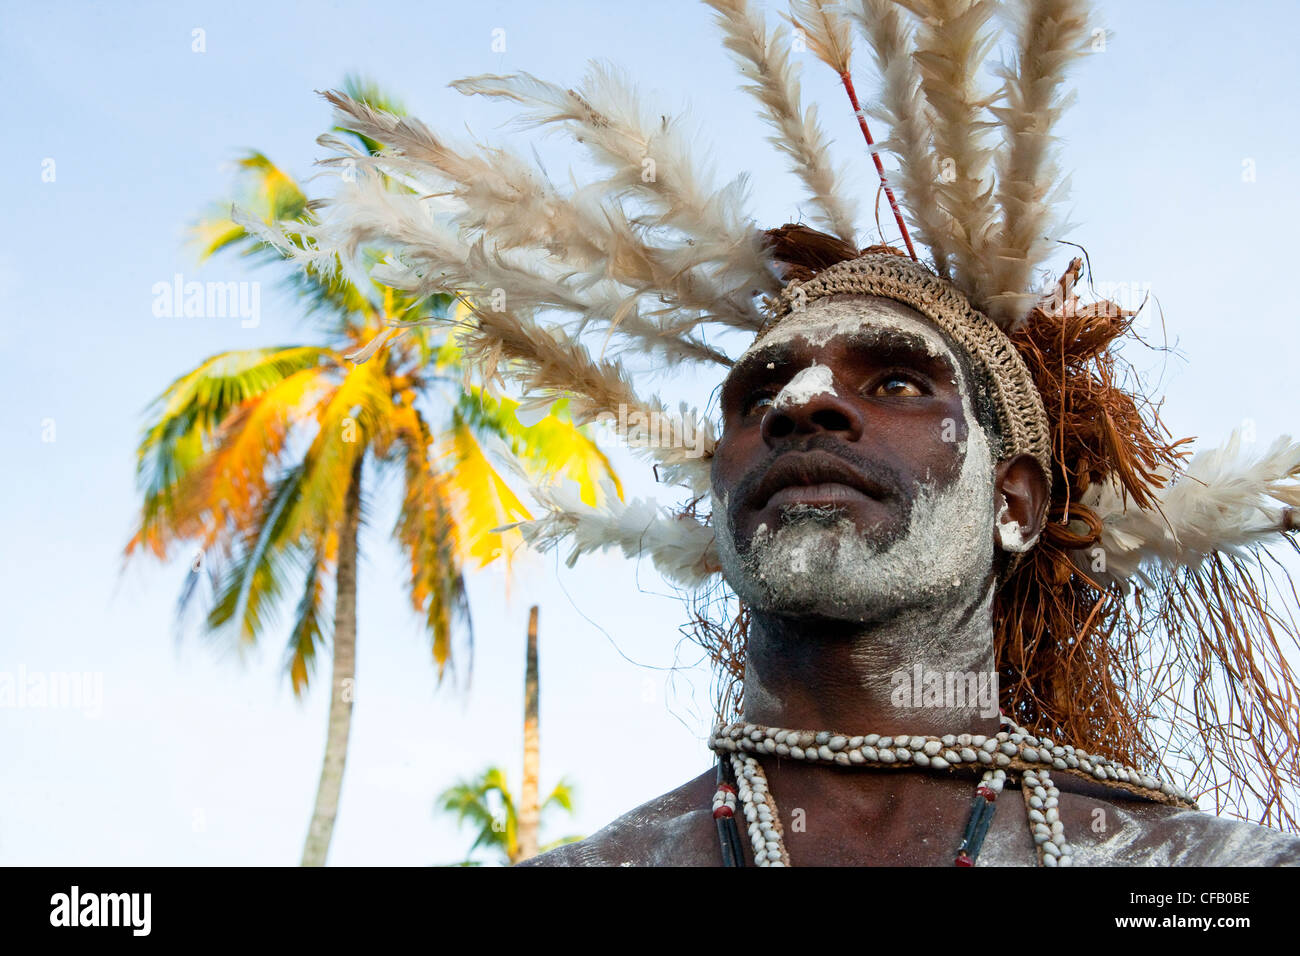 Man from the Asmat Tribe, Agats village, New Guinea, Indonesia. Stock Photo